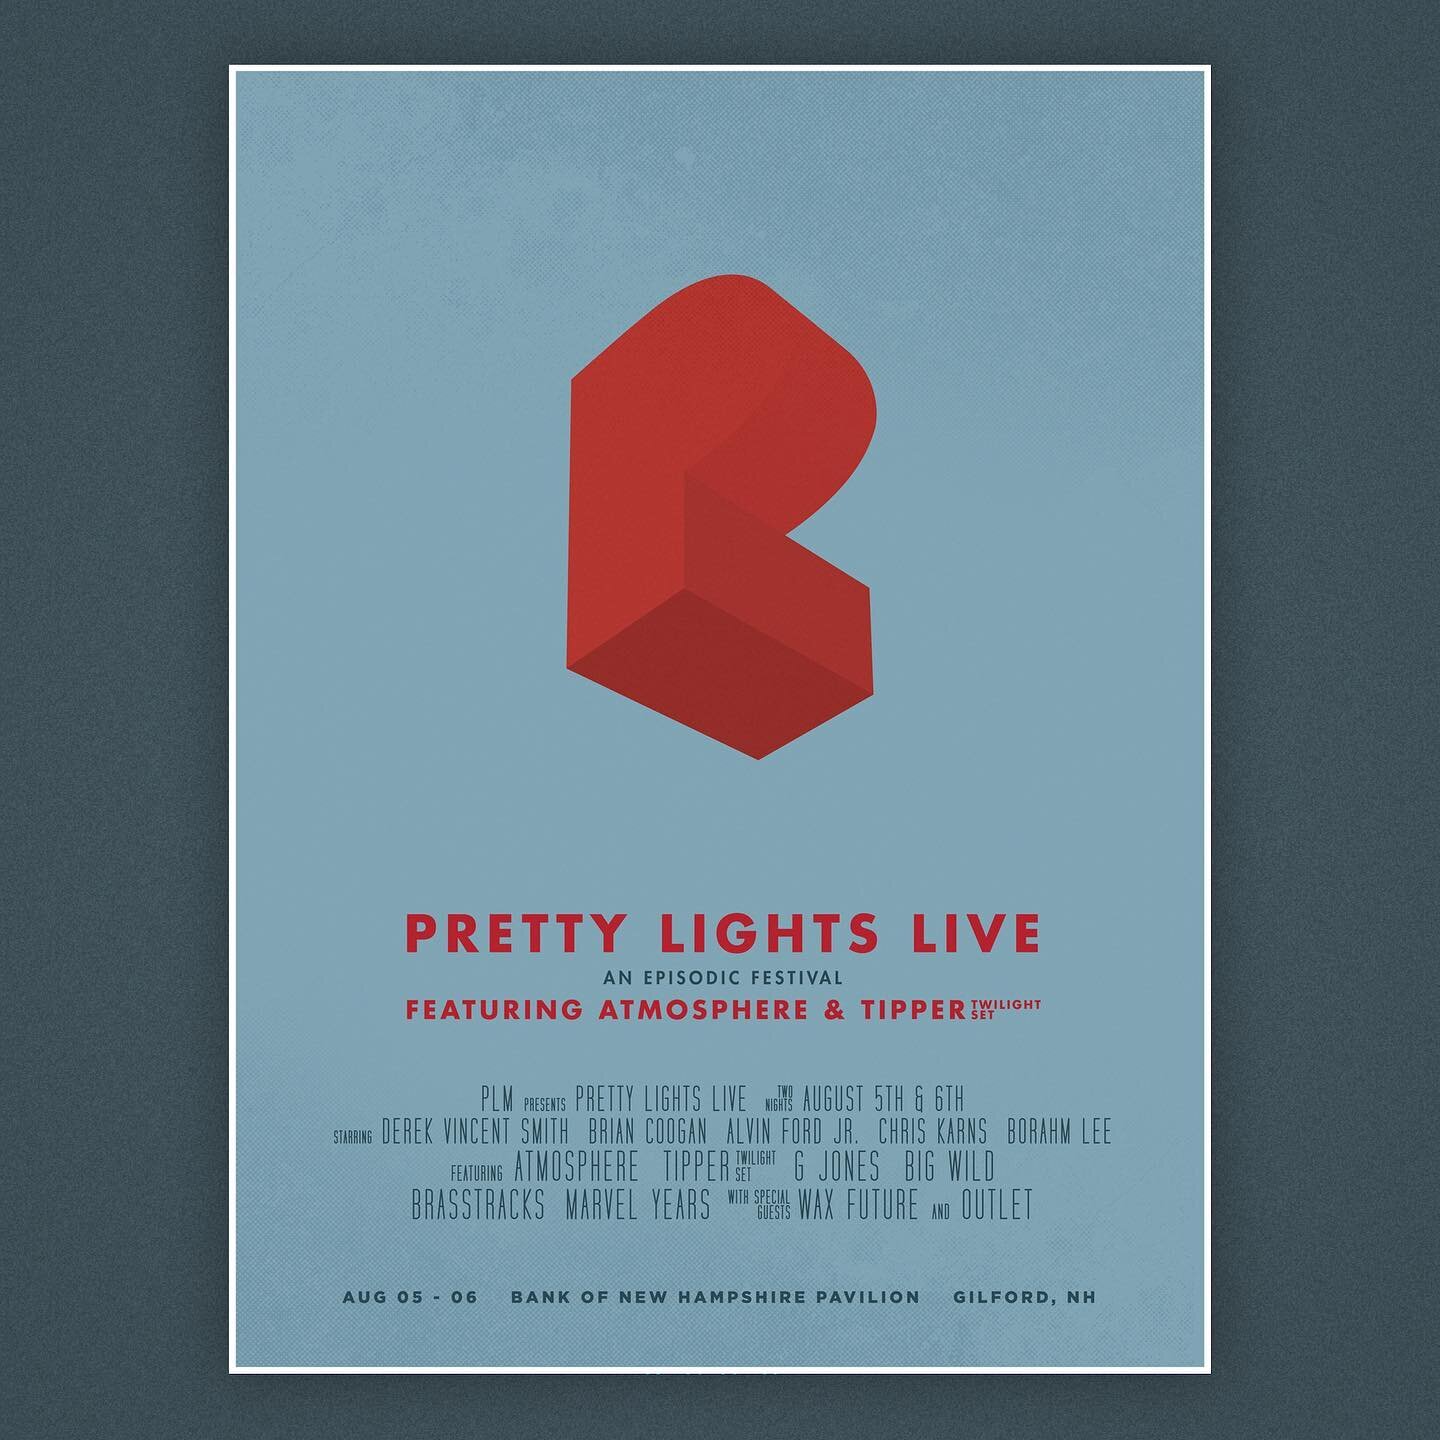 Tour branding and admat designs for the first @prettylights episodic tour back in 2016. After I designed the new PL monogram that year we started exploring a lot of ideas for the tour branding&hellip; ultimately it came down to me and Derek pulling a